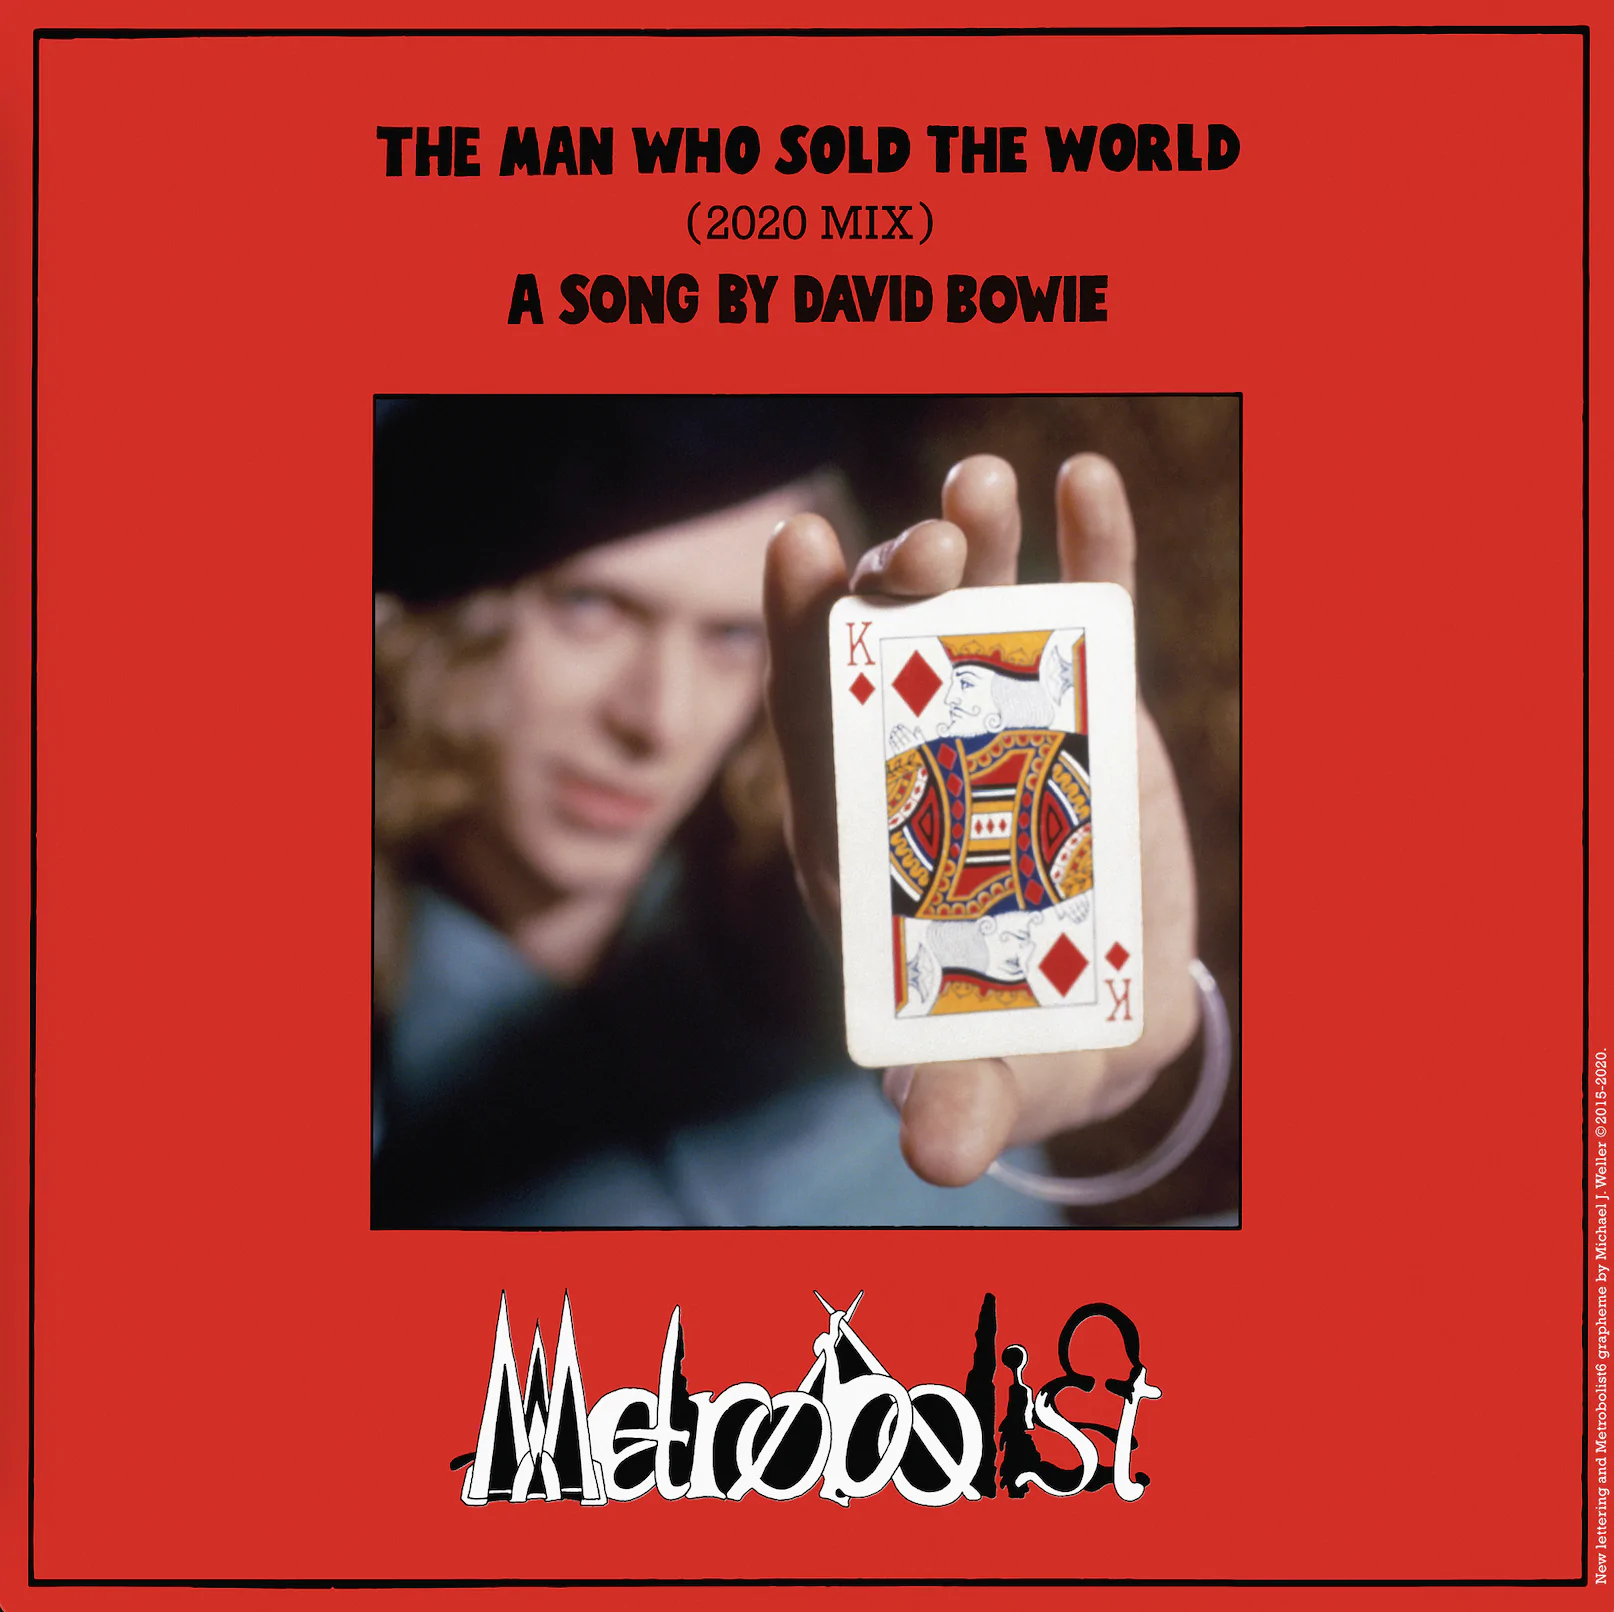 Listen to DAVID BOWIE’s ’The Man Who Sold The World (2020 mix)’